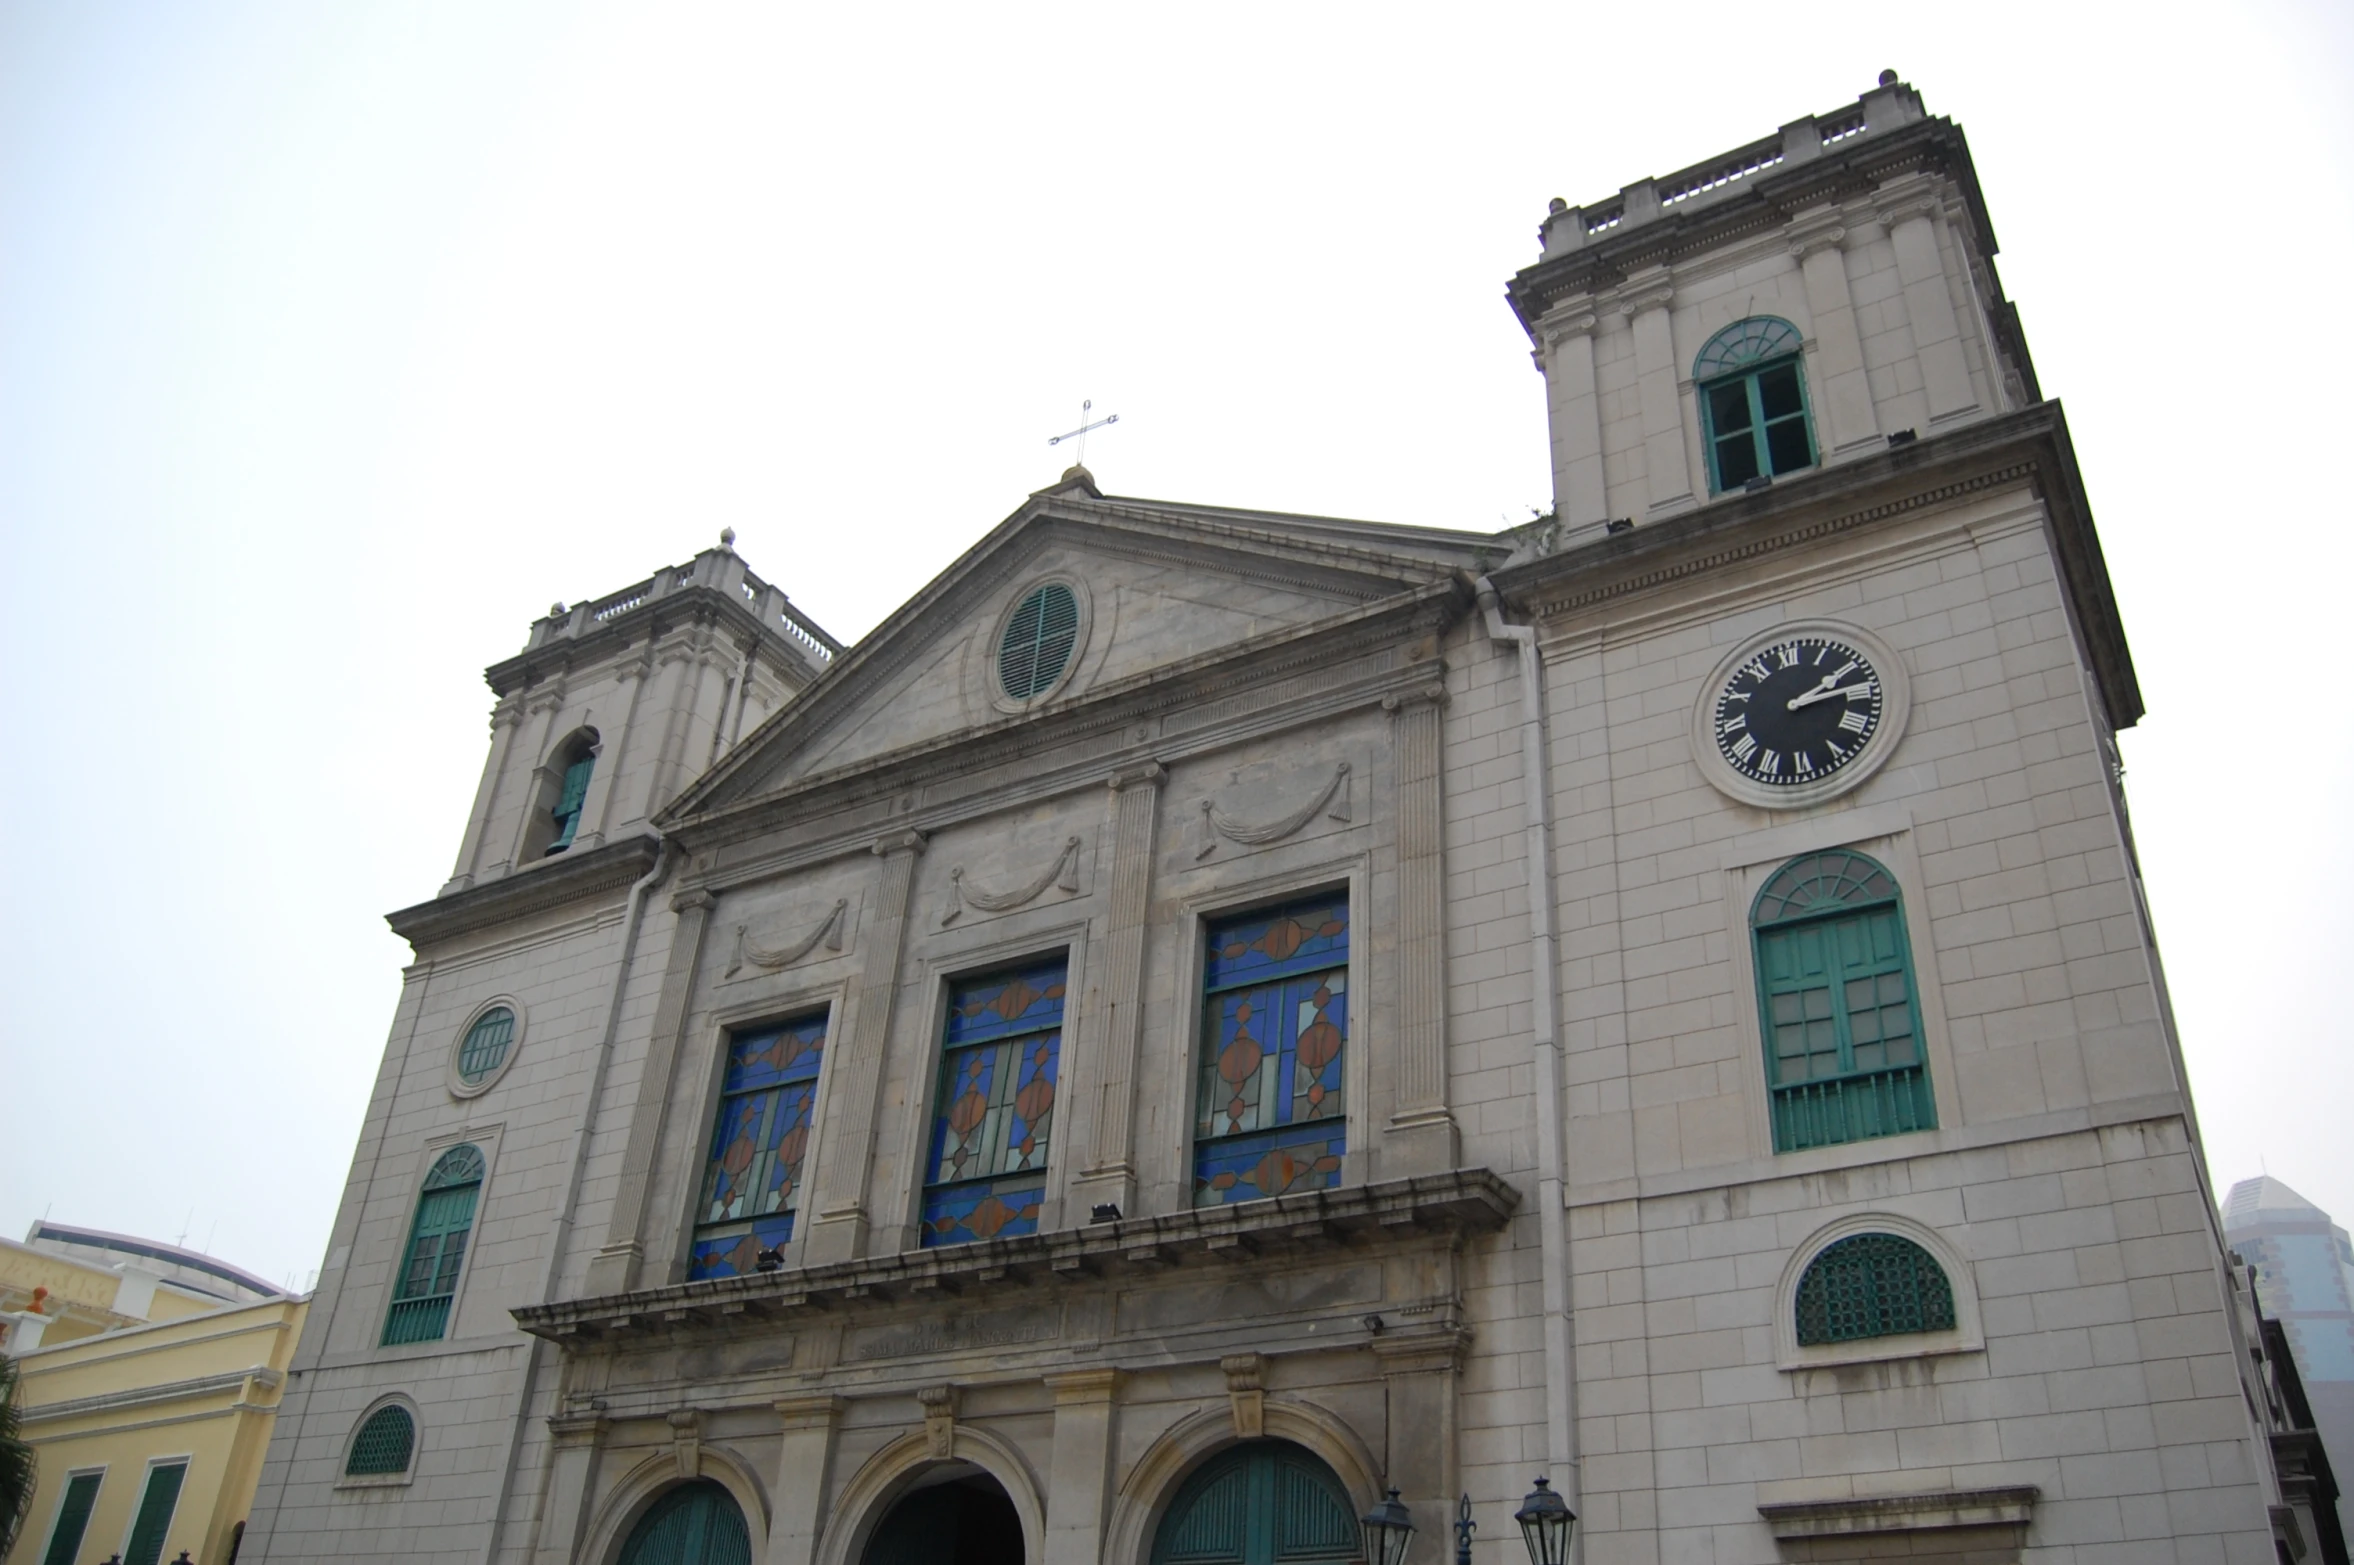 the facade of an old church with arched windows and a clock